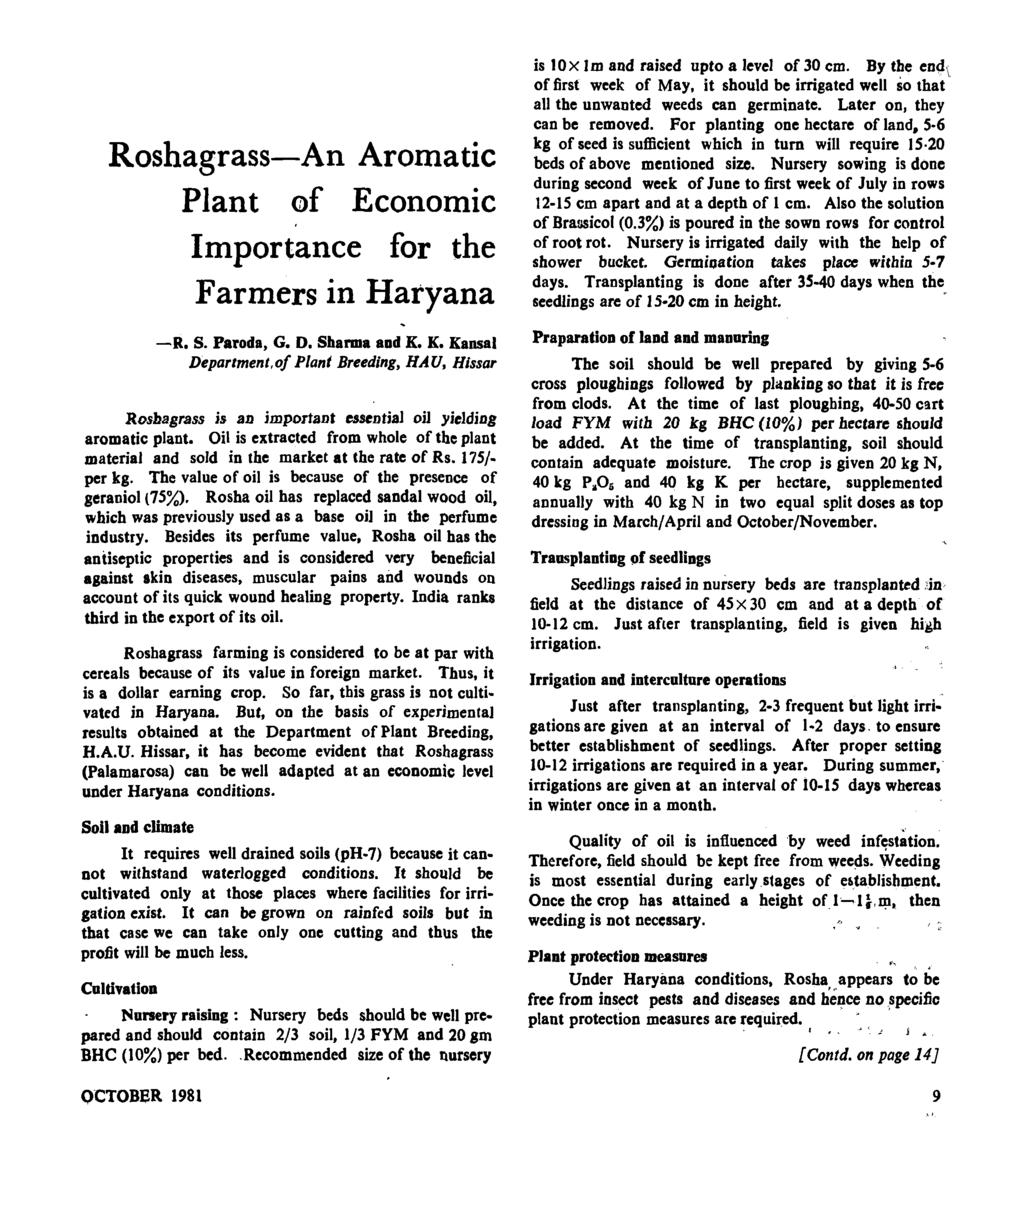 Roshagrass-An Aromatic Plant of Economic Importance for the Farmers in Hatyana -R. s. Paroda, G. D. Sharma aad K.